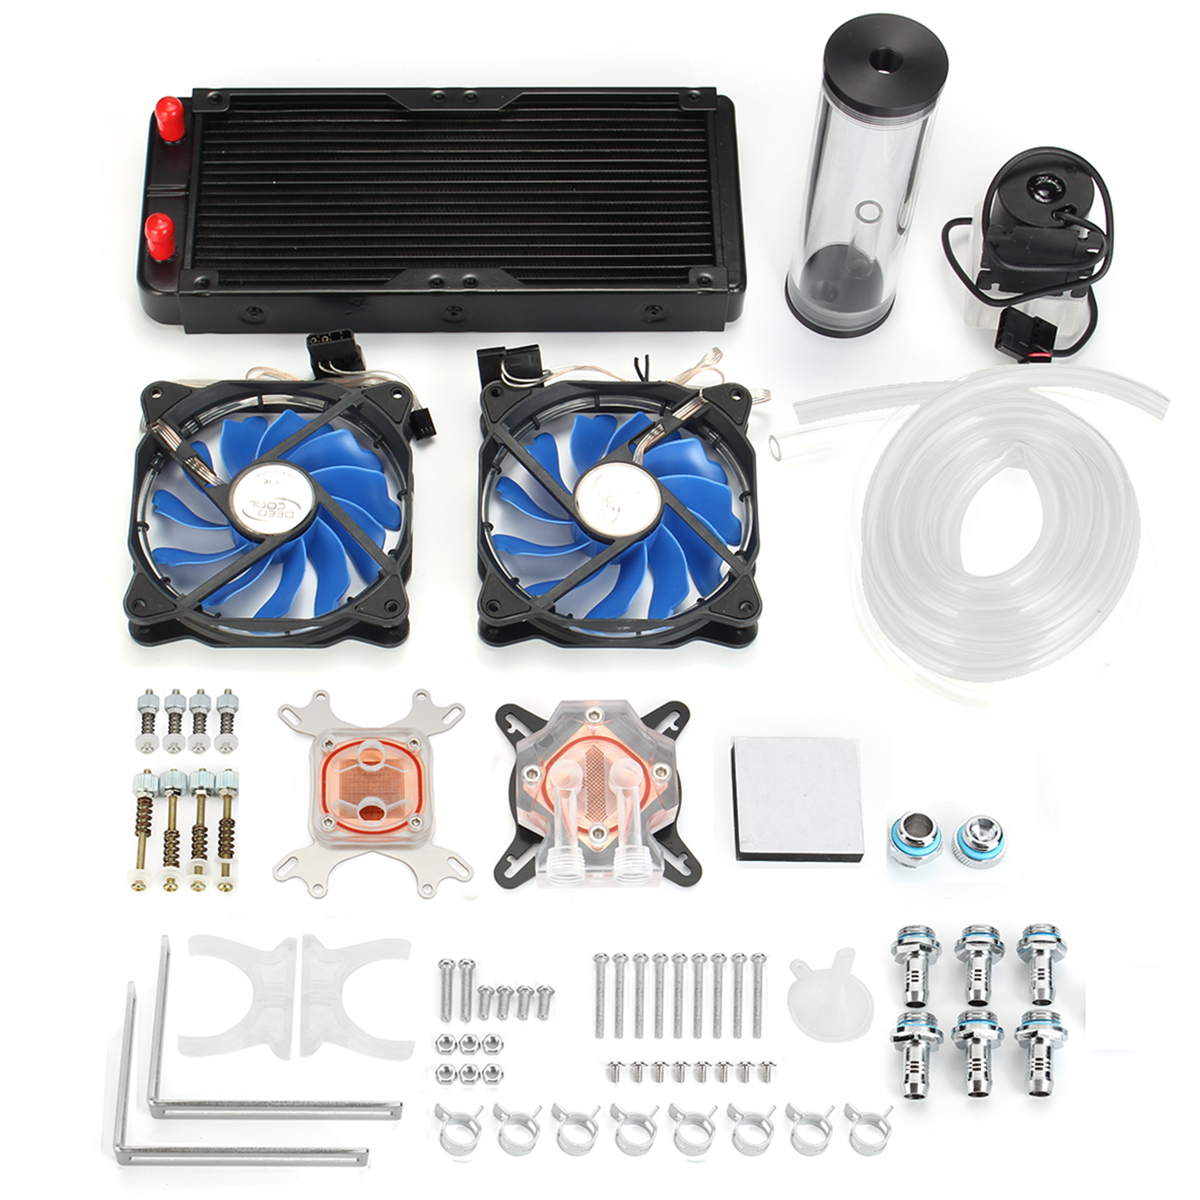 Find PC Water Cooling Kit 240mm Radiator Pump Reservoir CPU Block Rigid Tubes DIY for Sale on Gipsybee.com with cryptocurrencies